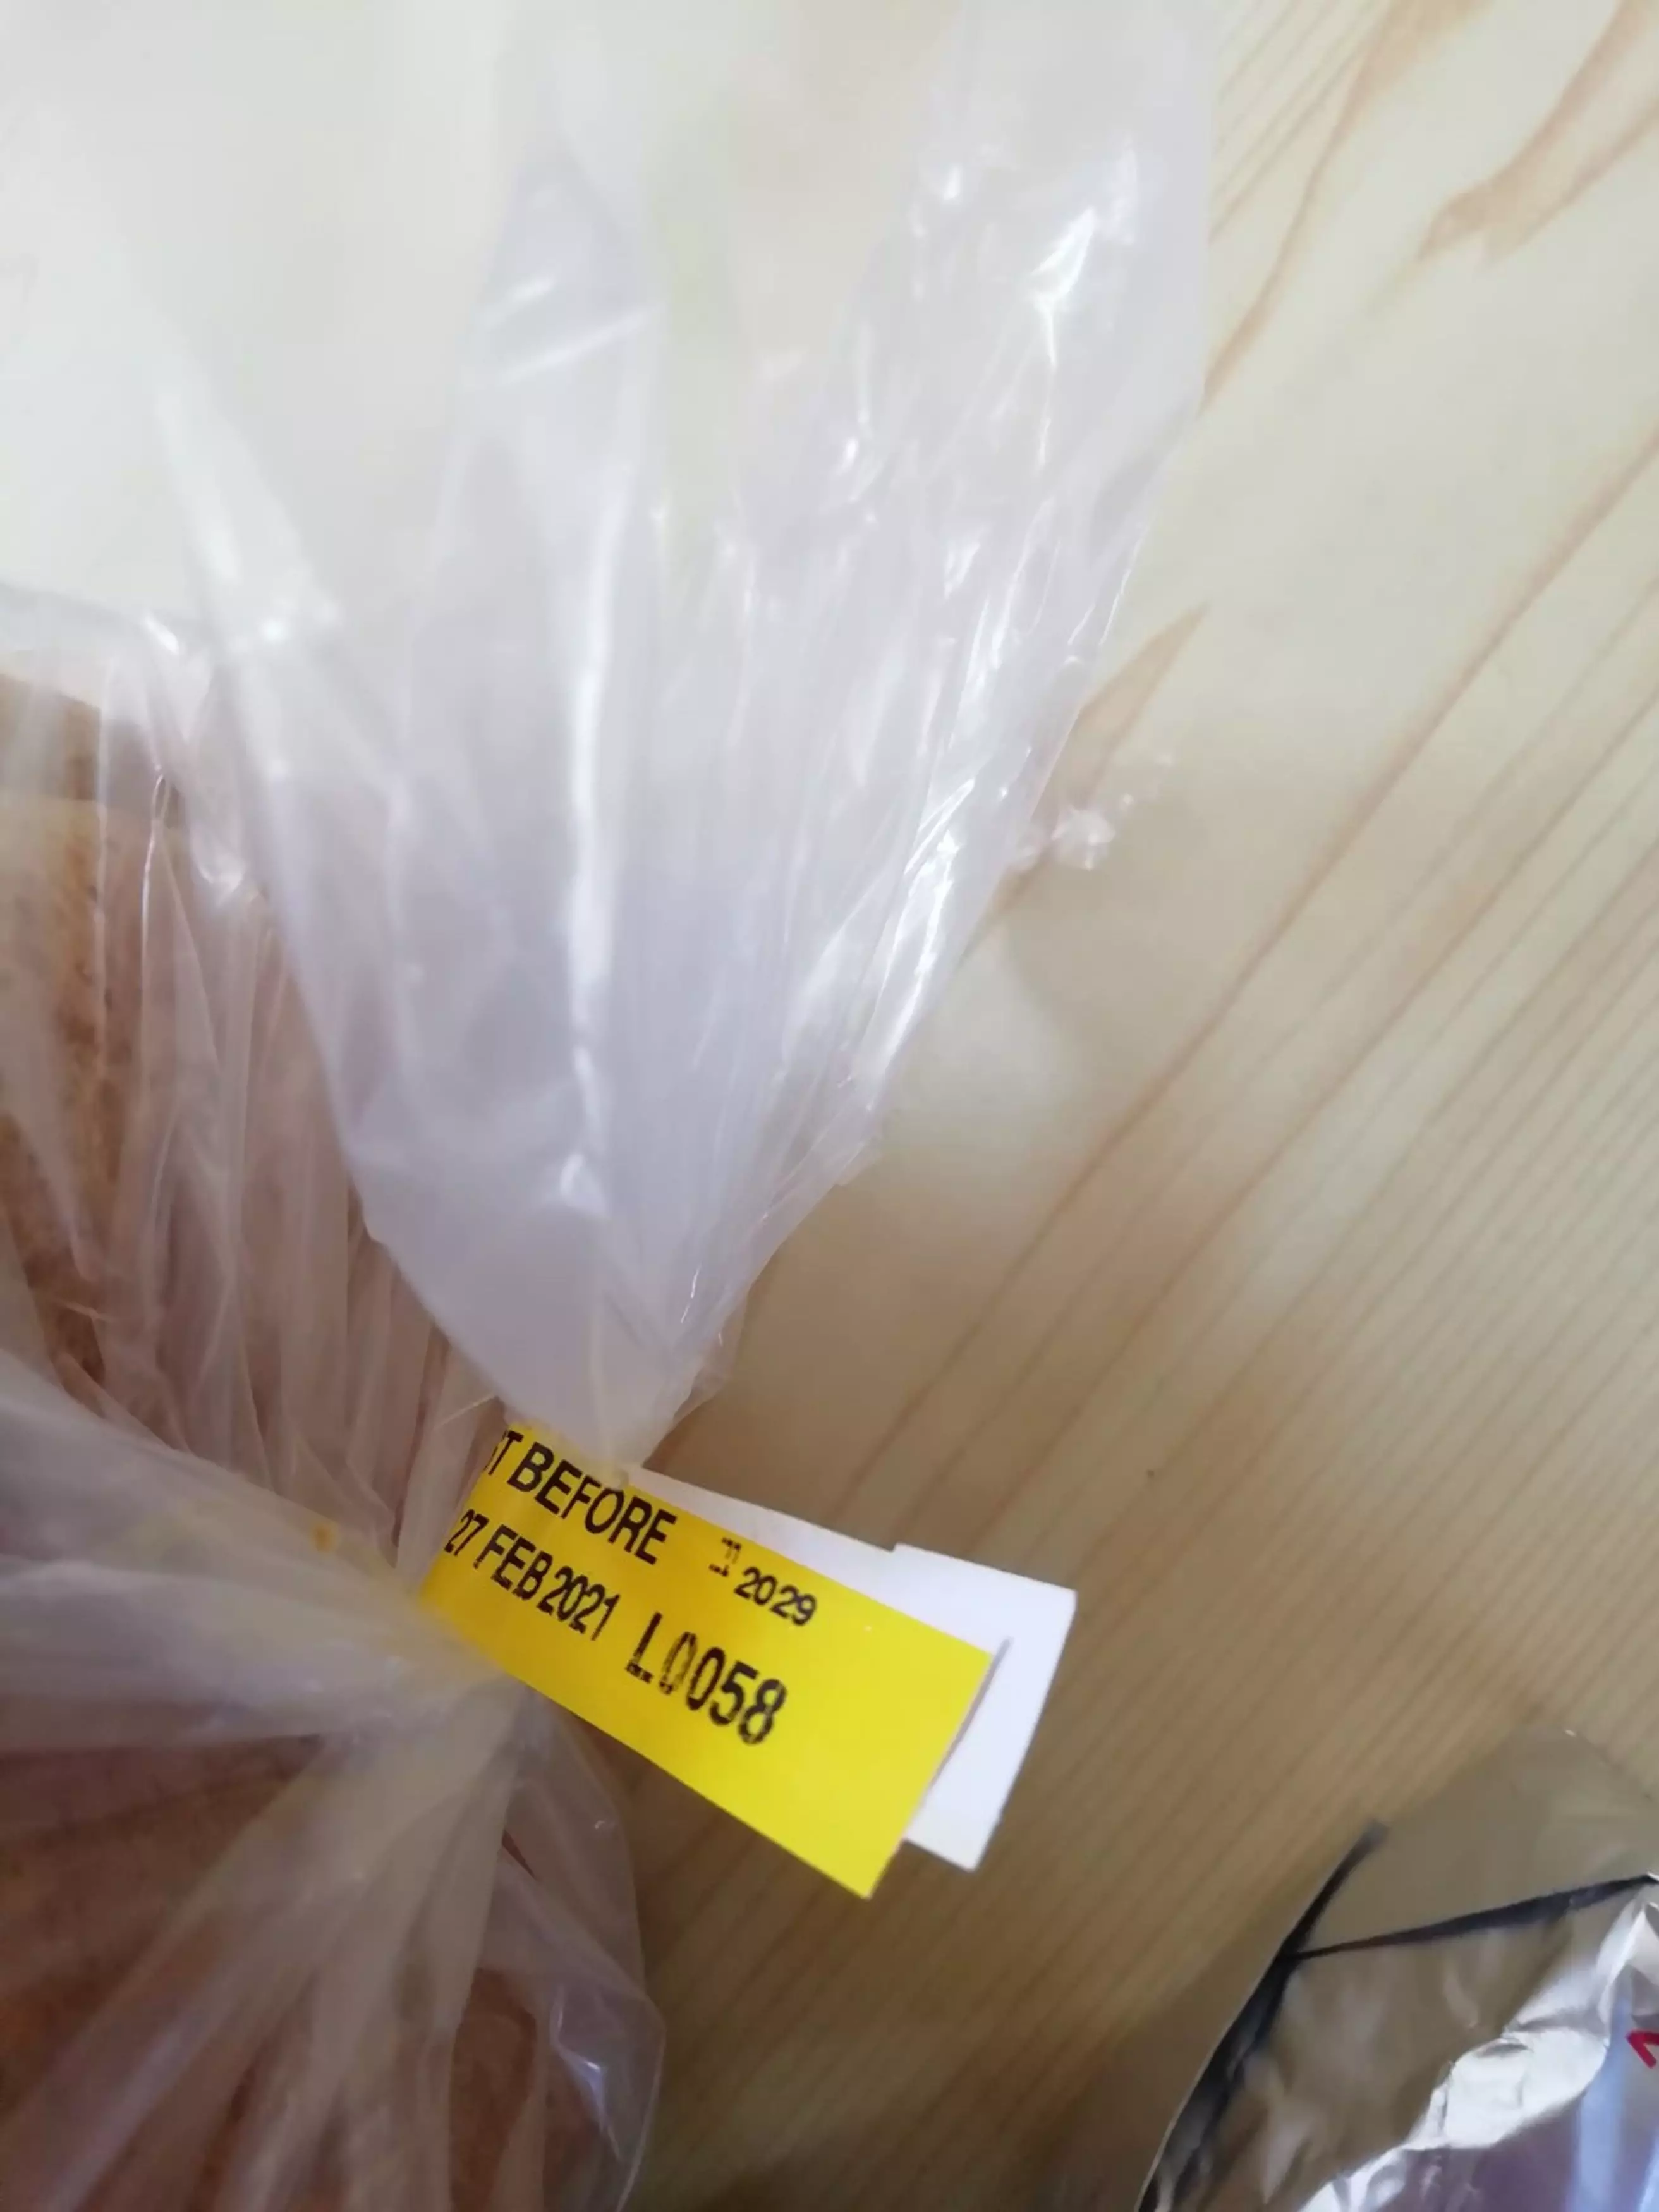 The bread had a sell-by-date of February 2020 (